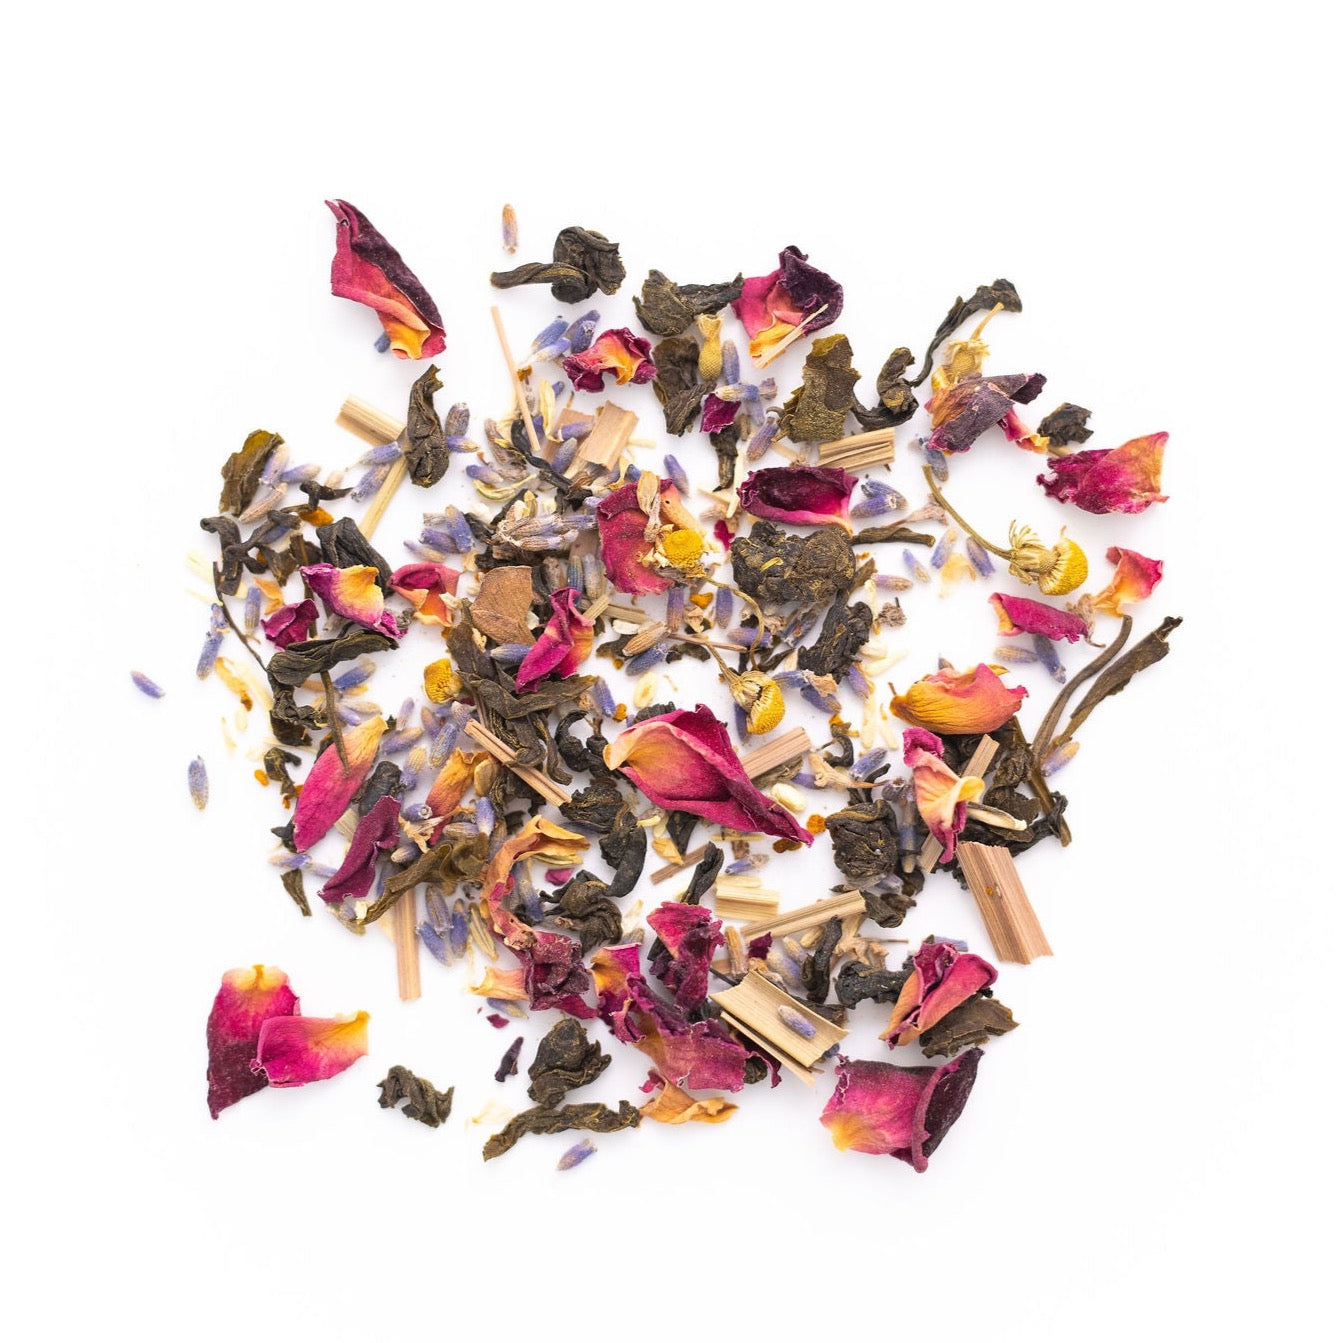 JUST BREATHE is an anti-anxiety blend with ingredients such as ashwagandha, Gingko biloba, rose & lavender